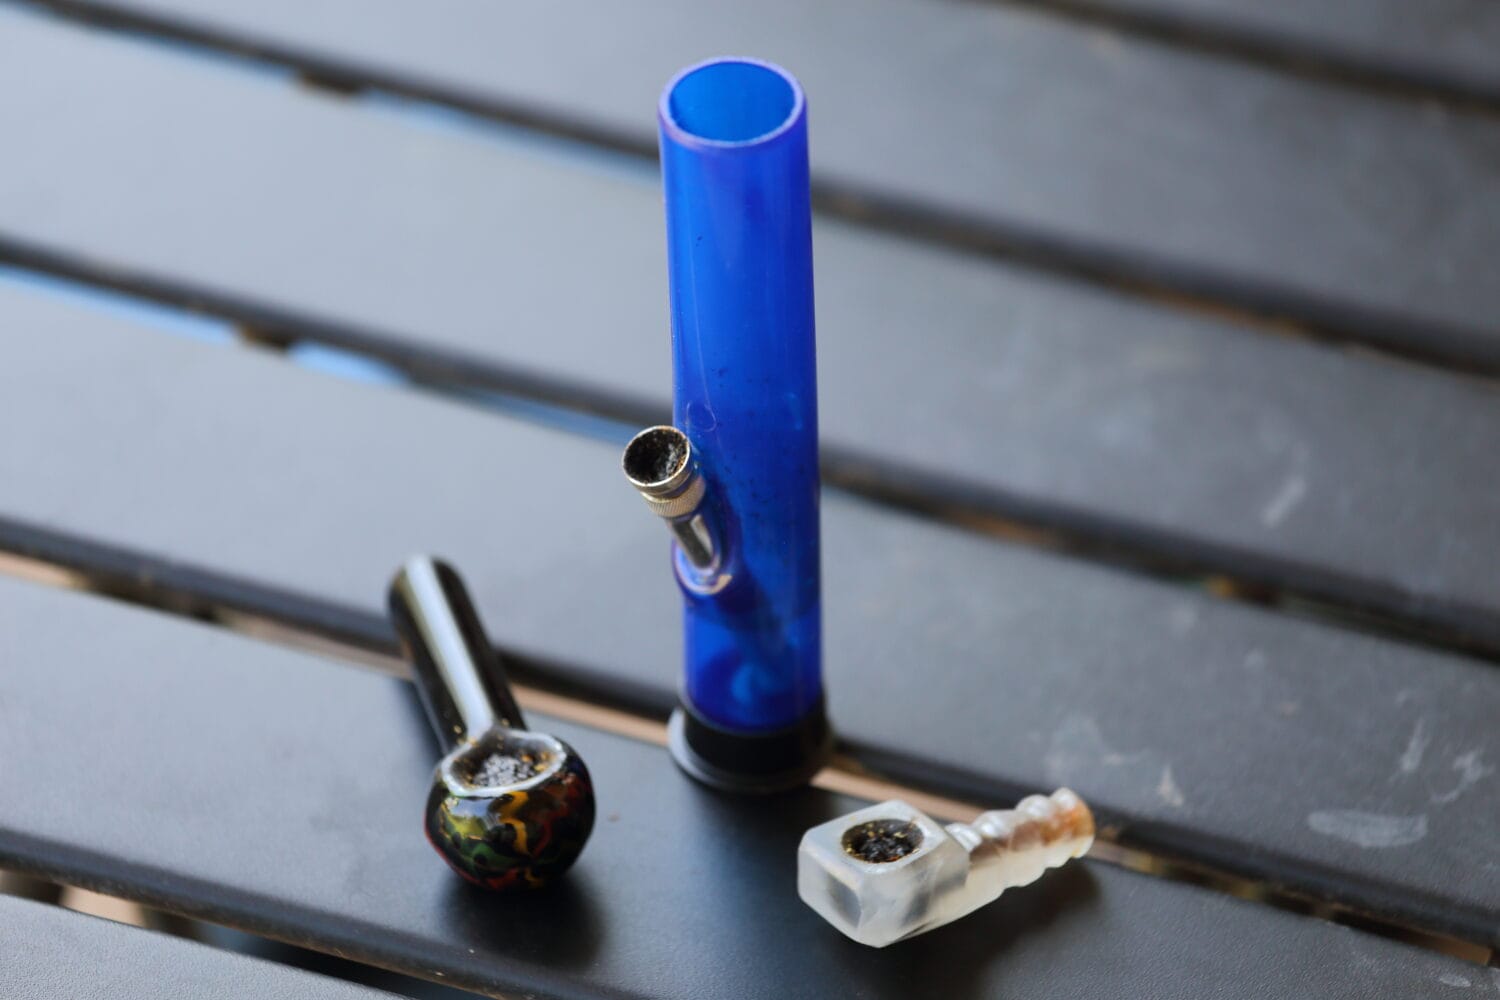 several smoking devices